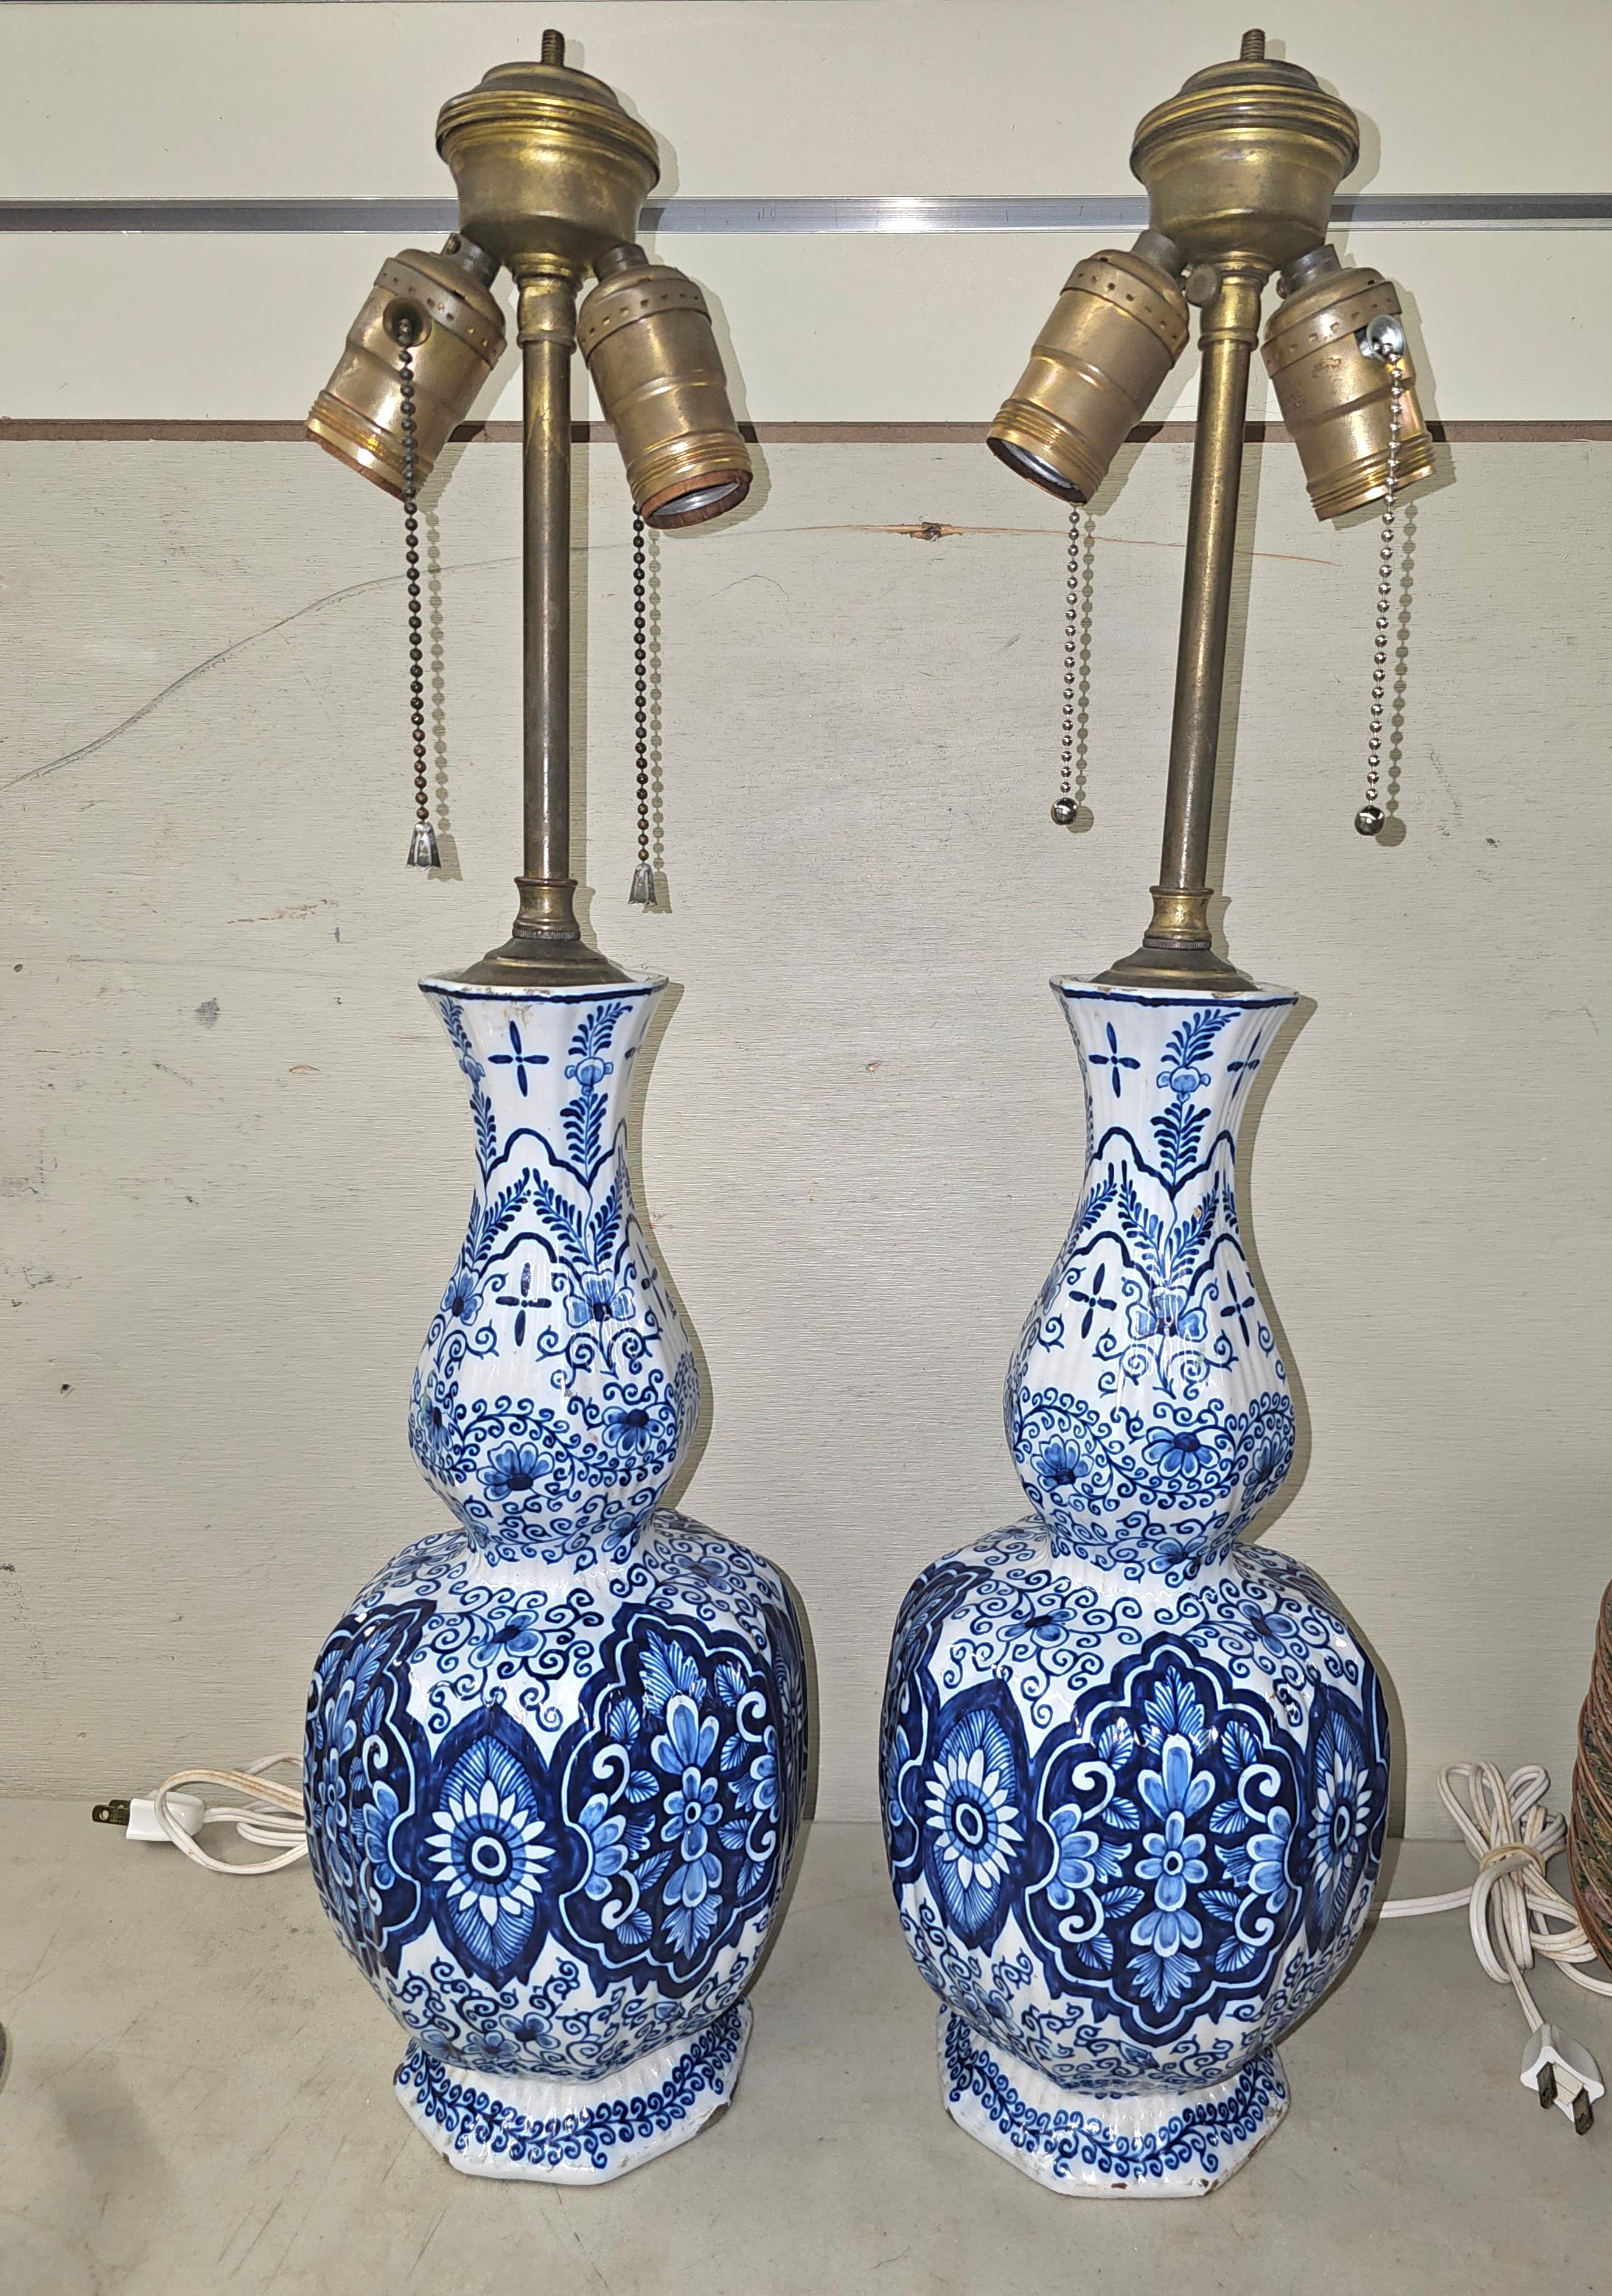 Dutch Colonial 18th C. Royal Delft Blue and White Lamp Mounted Vases, Signed Van Duijn Pair For Sale